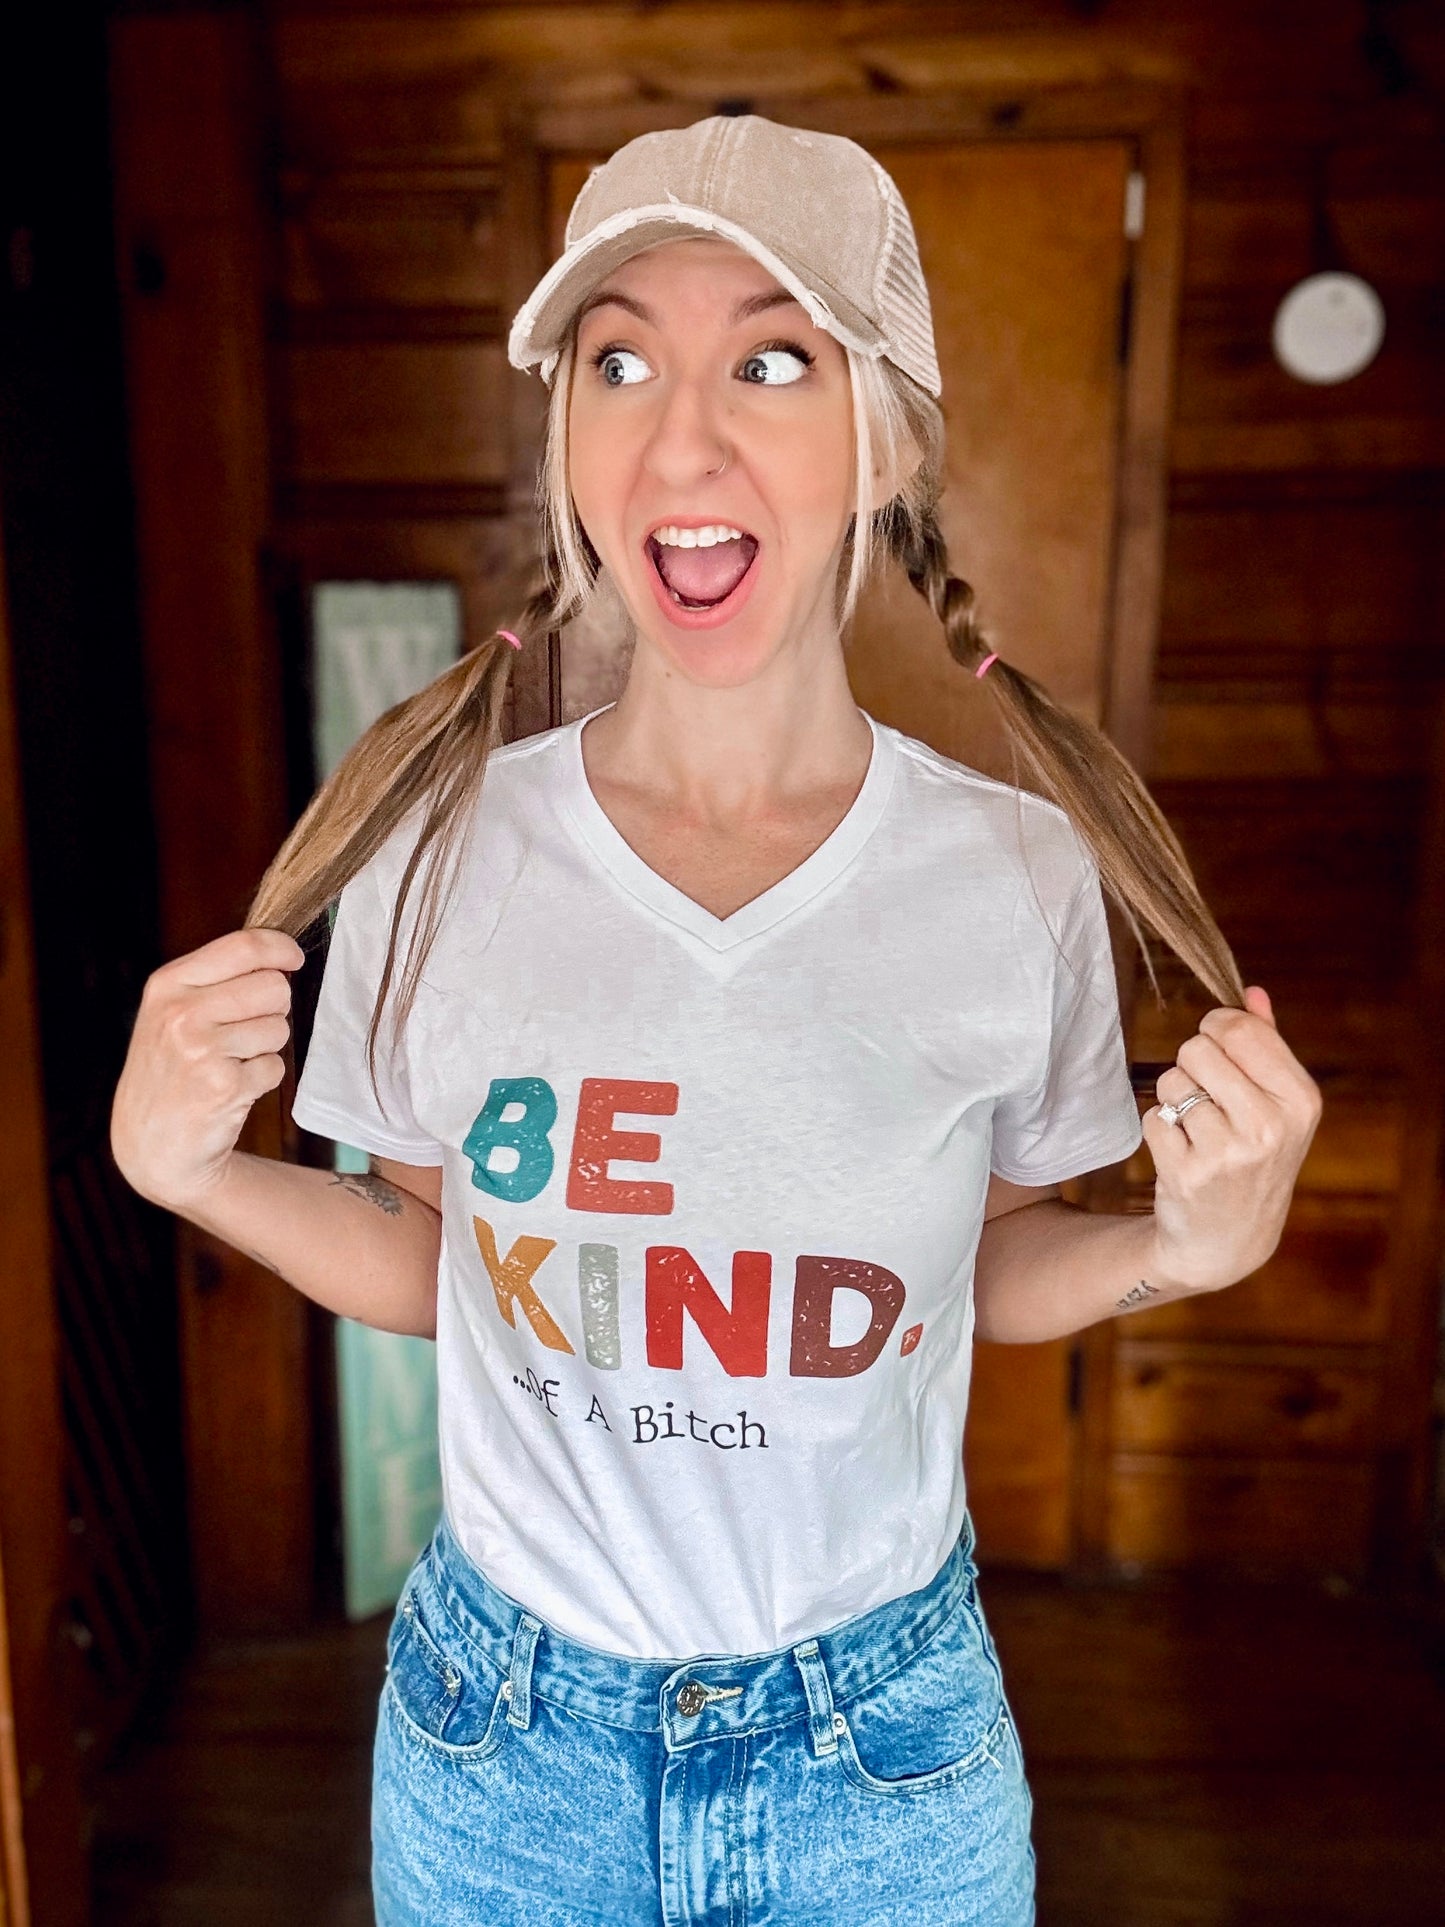 ‘Be Kind…Of A Bitch’ Graphic Tee